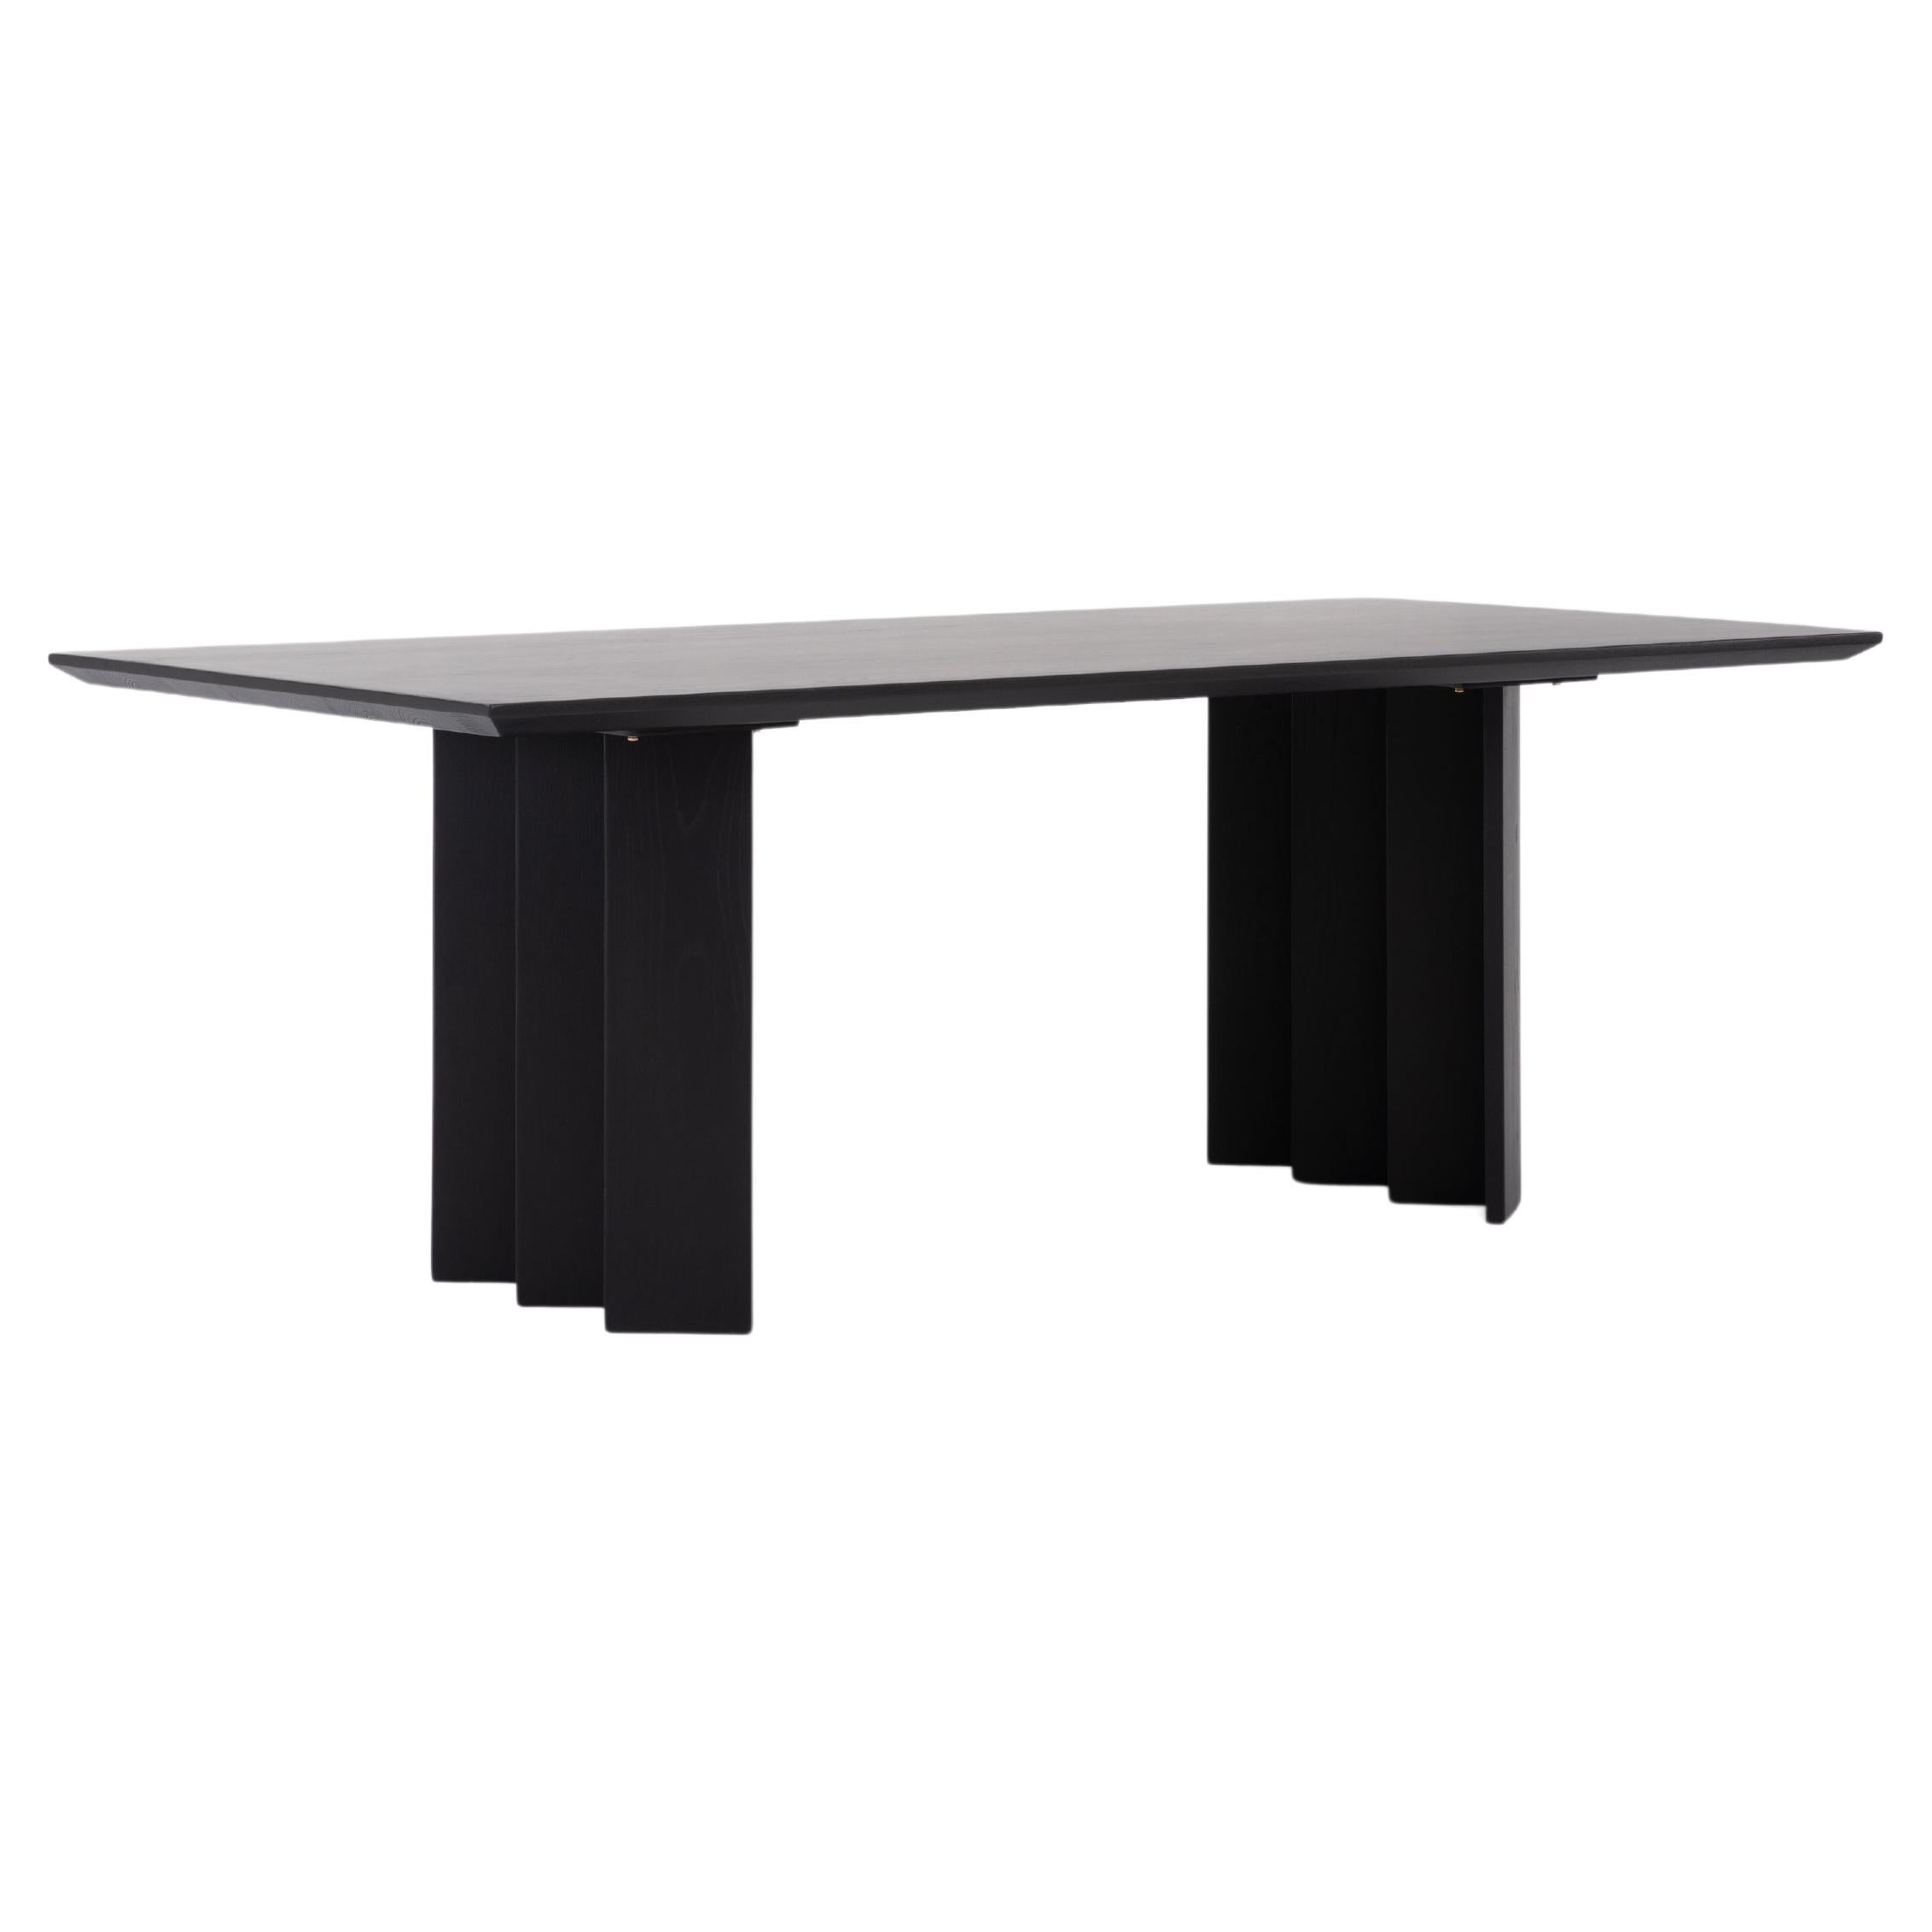 Zafal Dining Table 84", Black Minimalist Dining Table in Wood For Sale